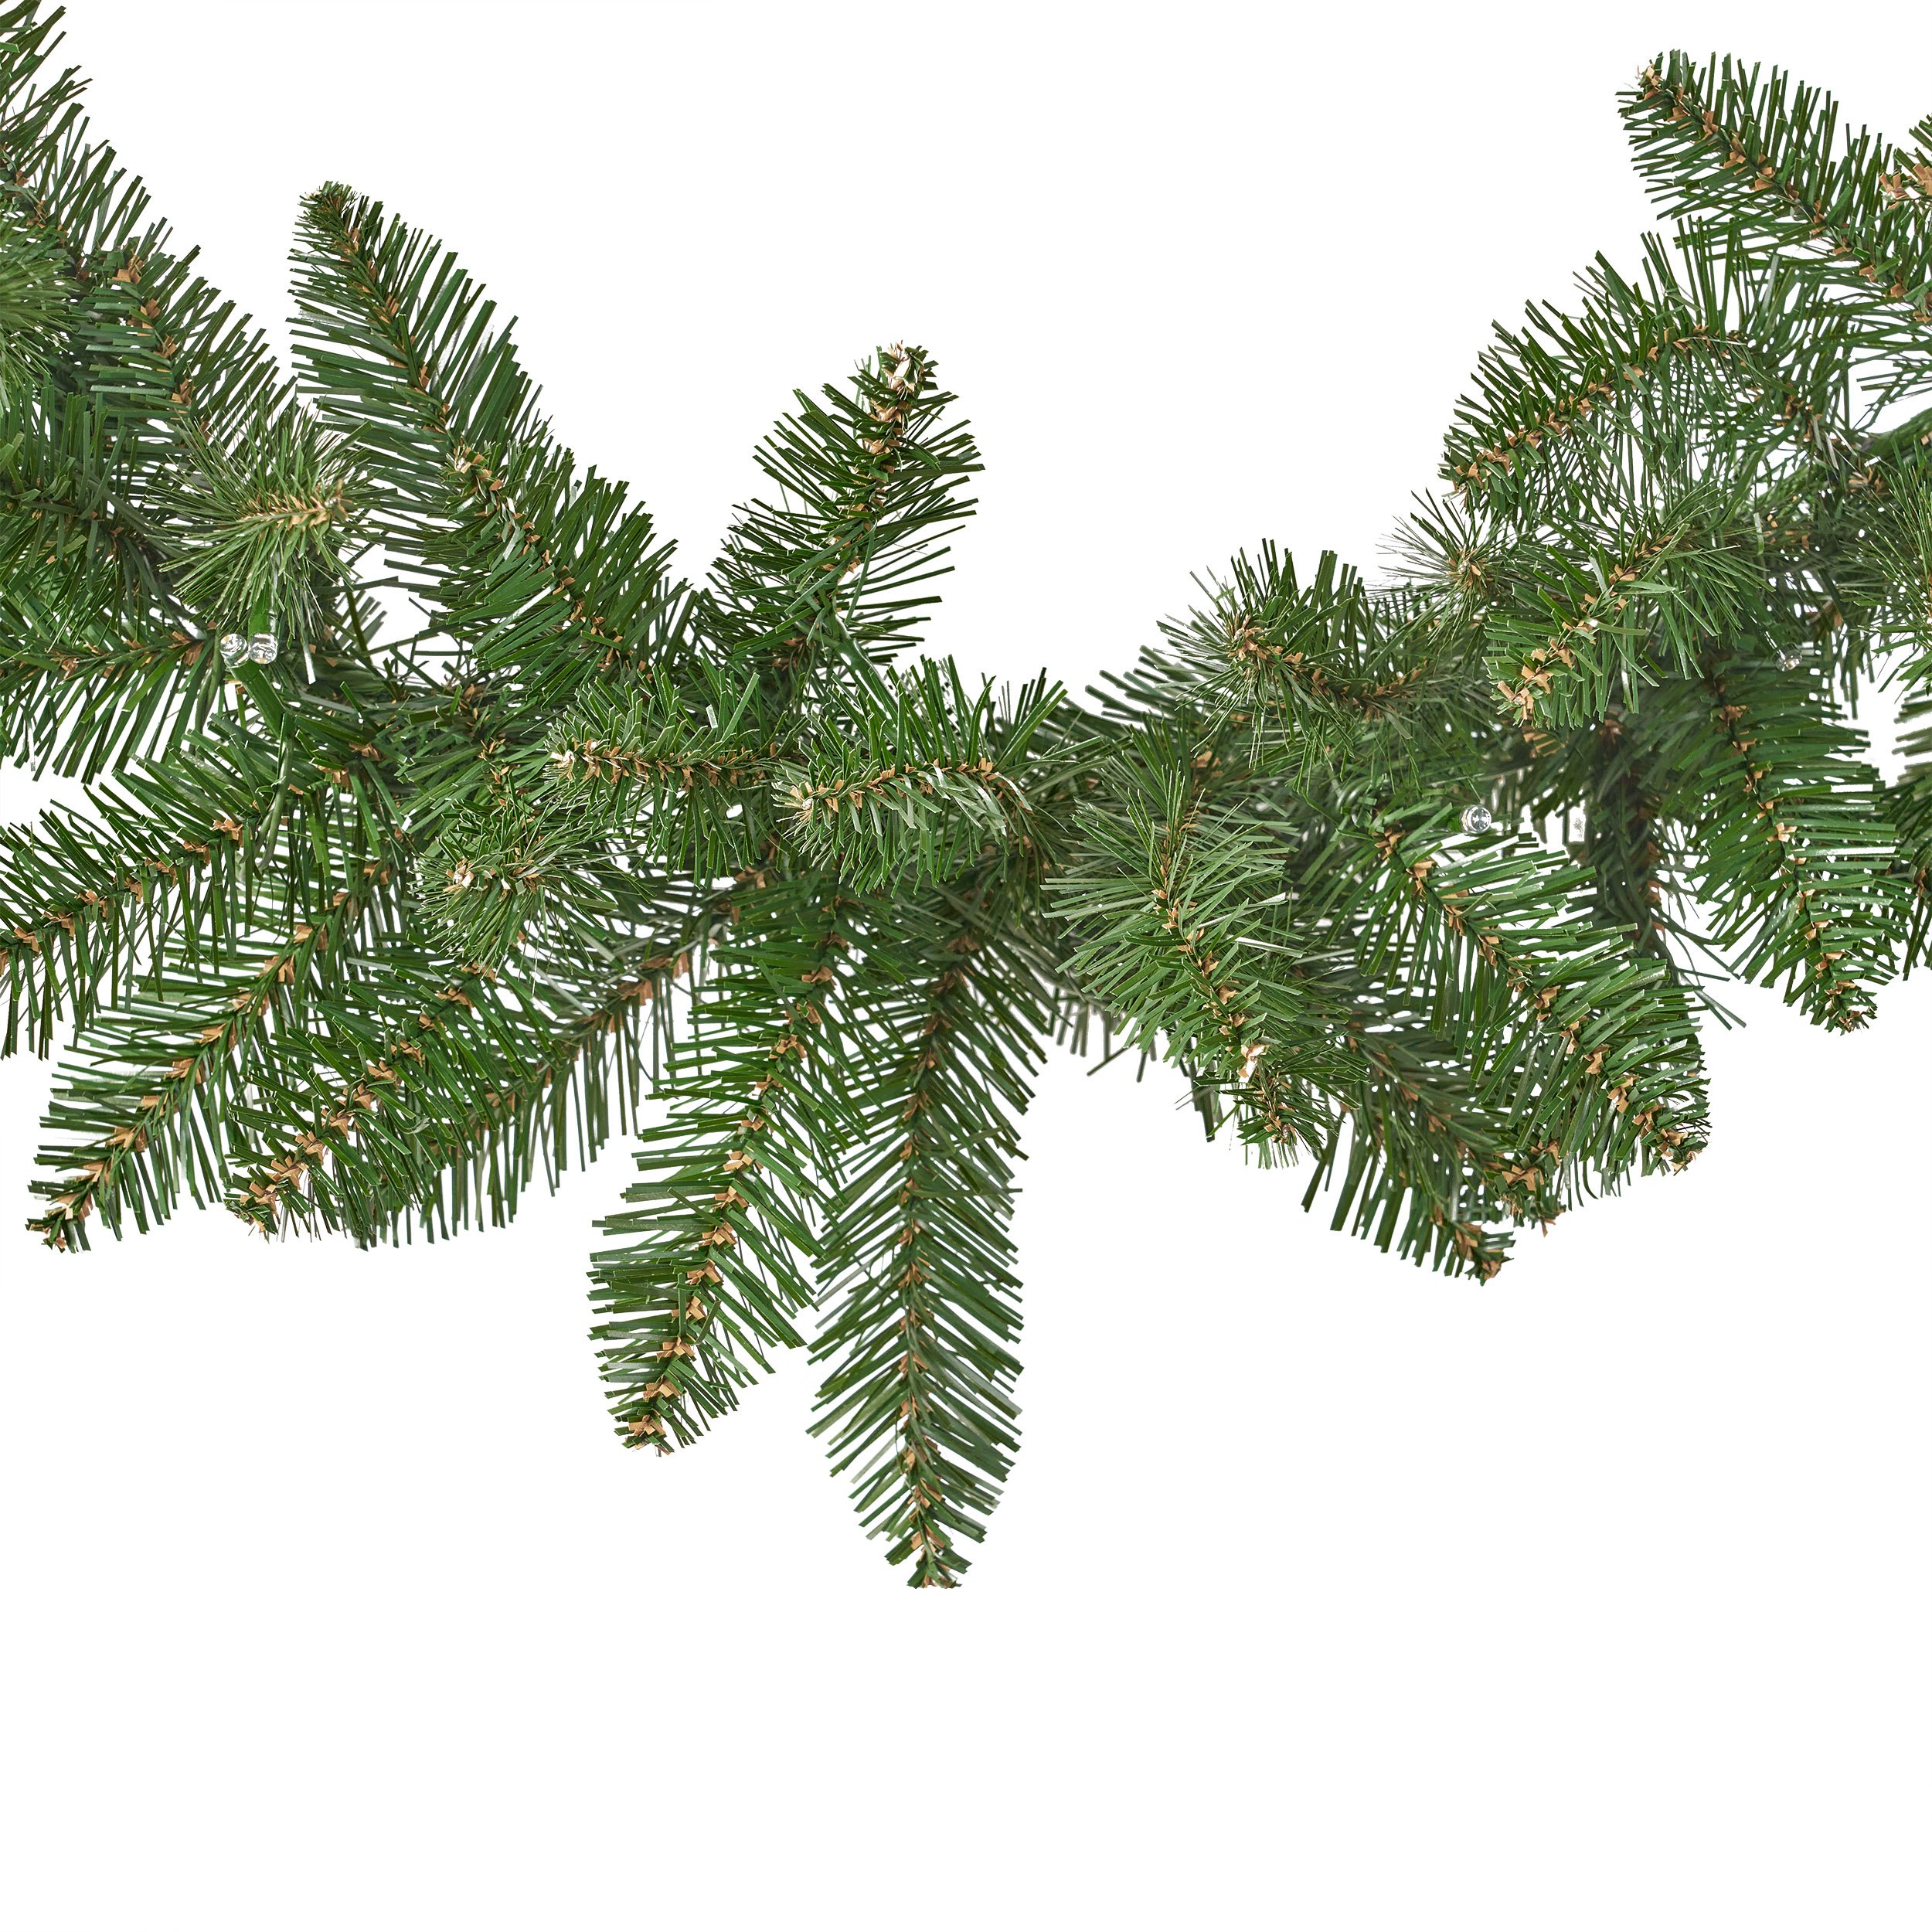 Alia Christmas Garland 9-foot Pre-Lit Norway Spruce Battery-Operated, Includes Timer Warm White LED Christmas Lights